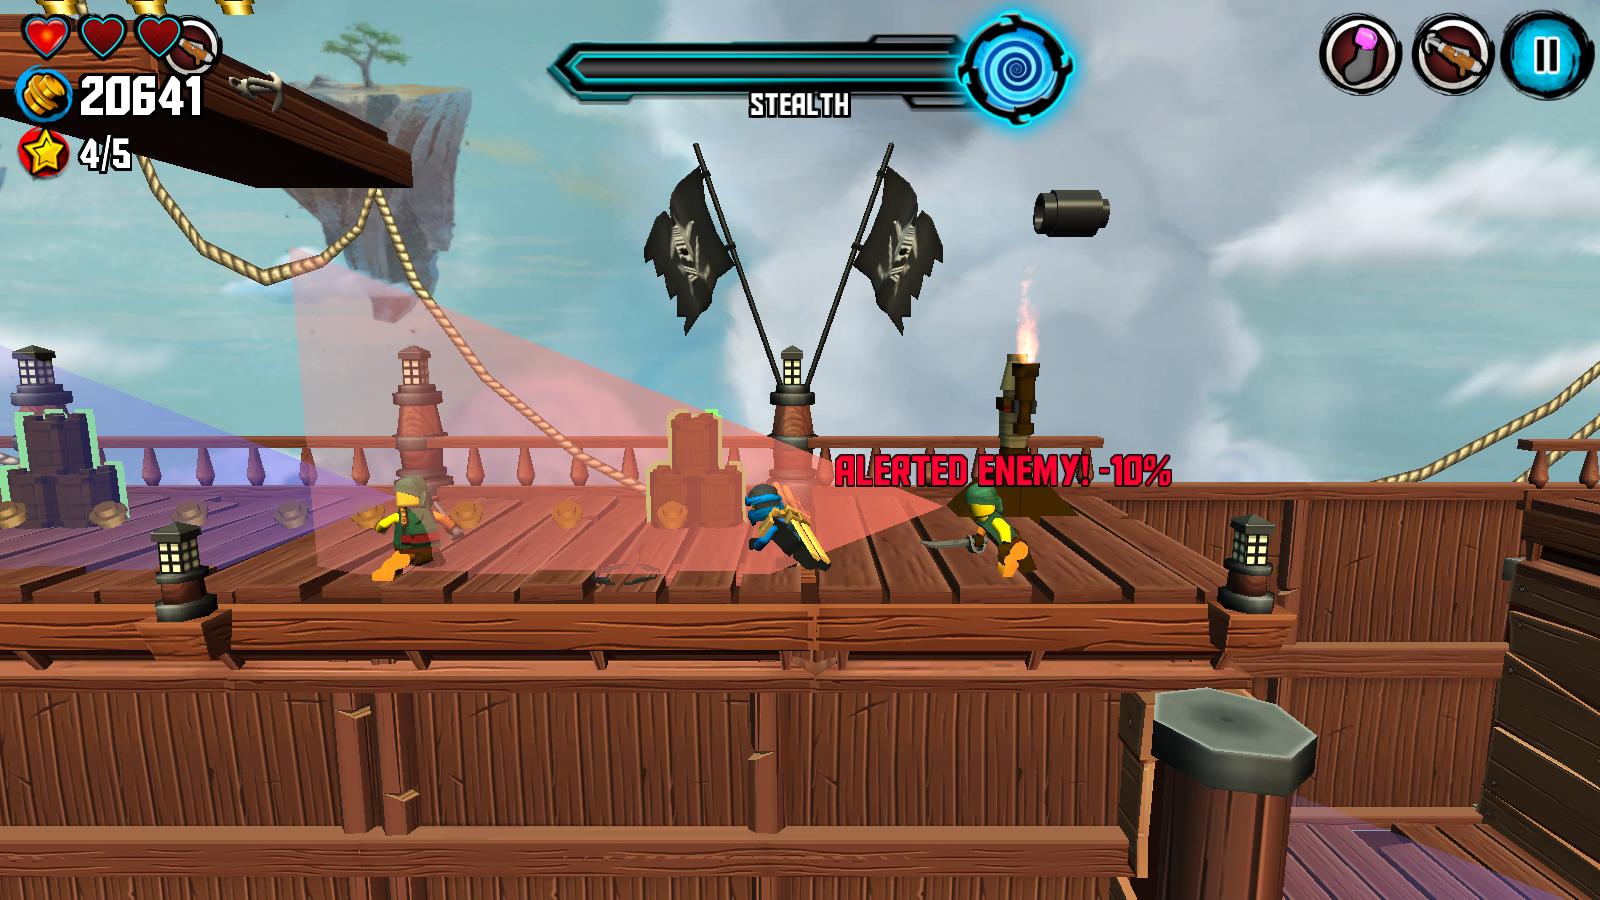 LEGO® Ninjago™: Skybound for Android - APK Download